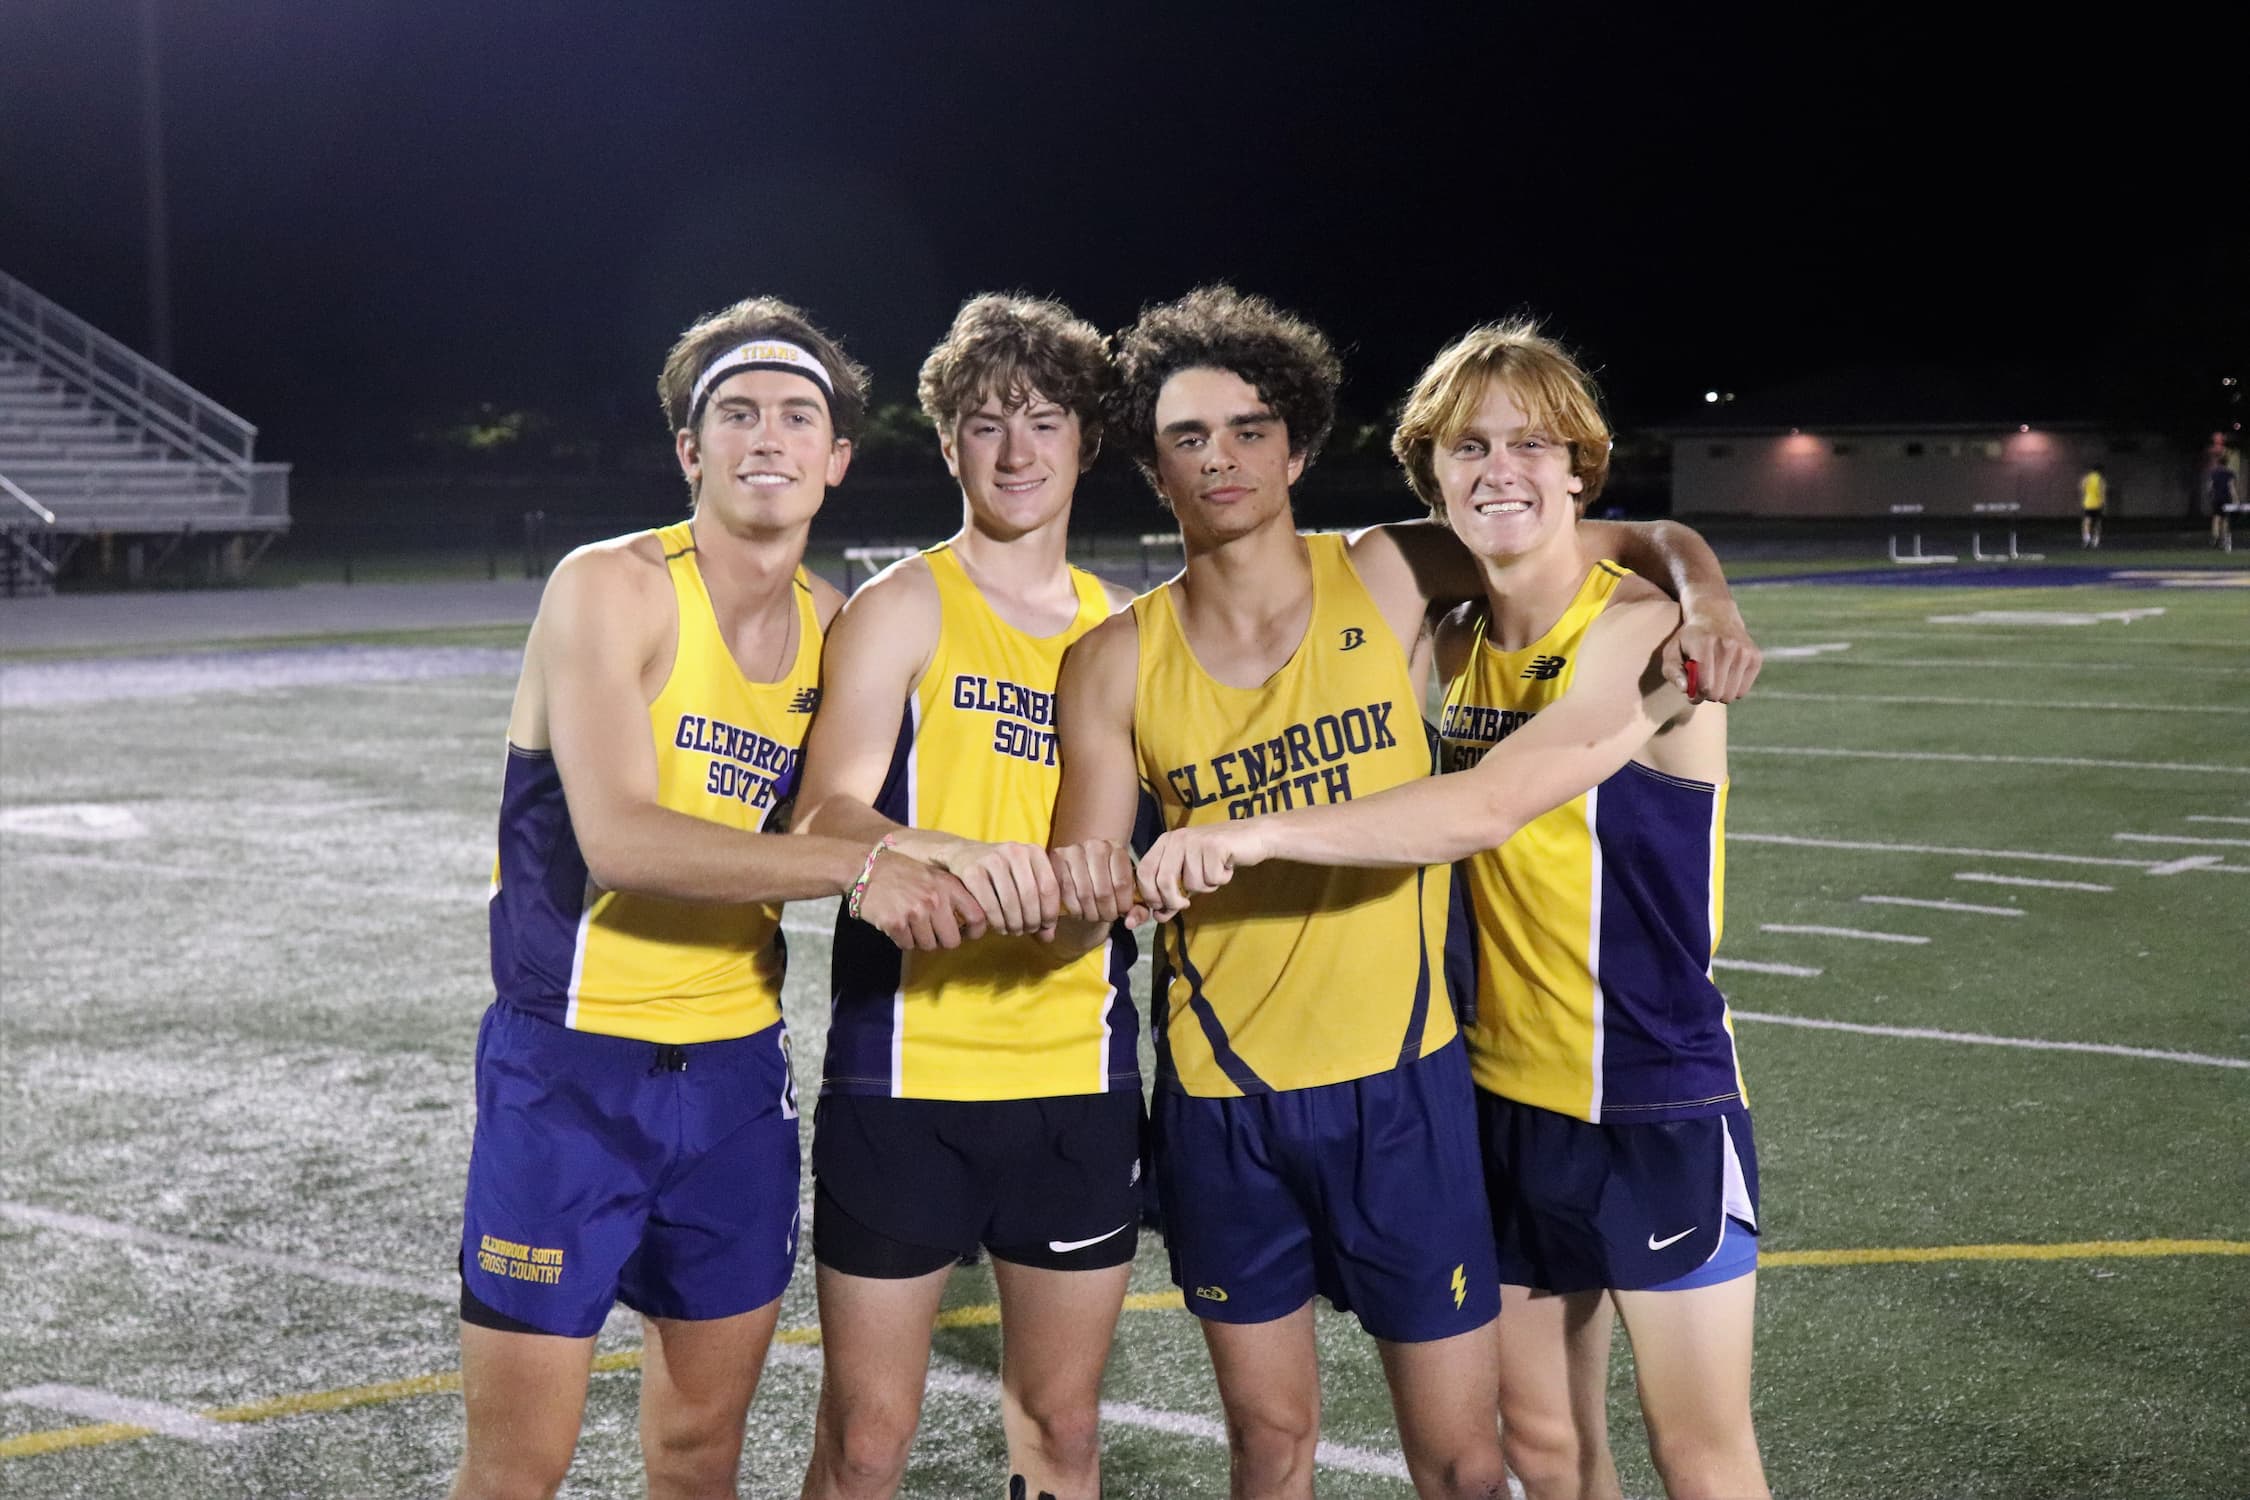 2022 State Meet Qualifiers from Glenbrook South